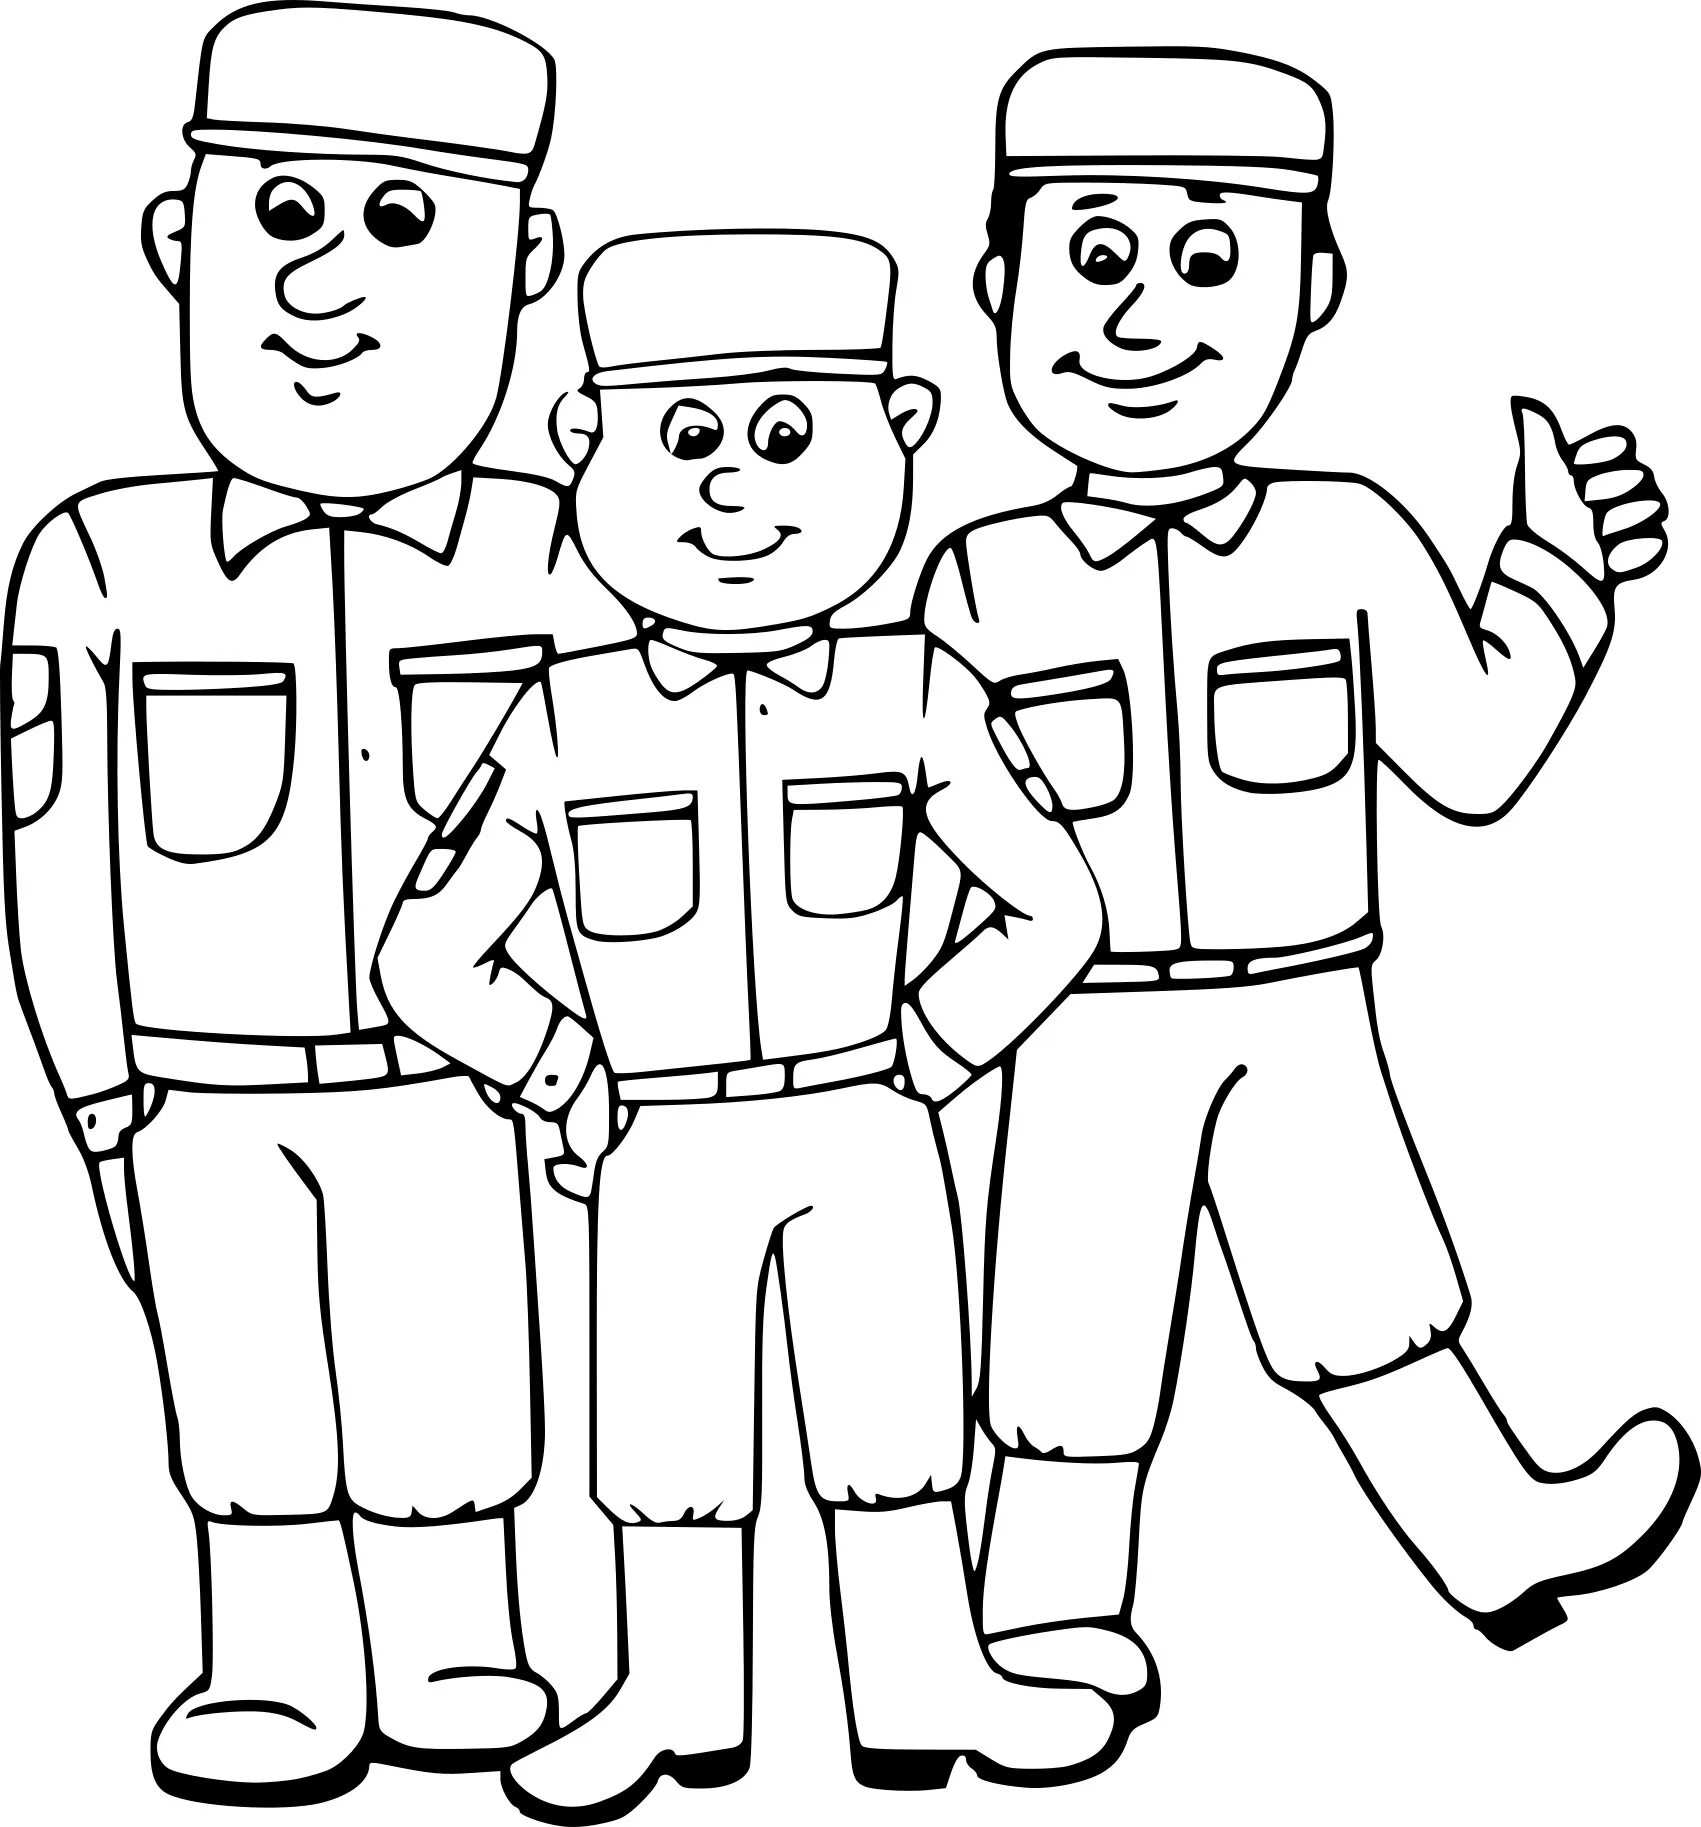 Pint-sized soldier coloring page